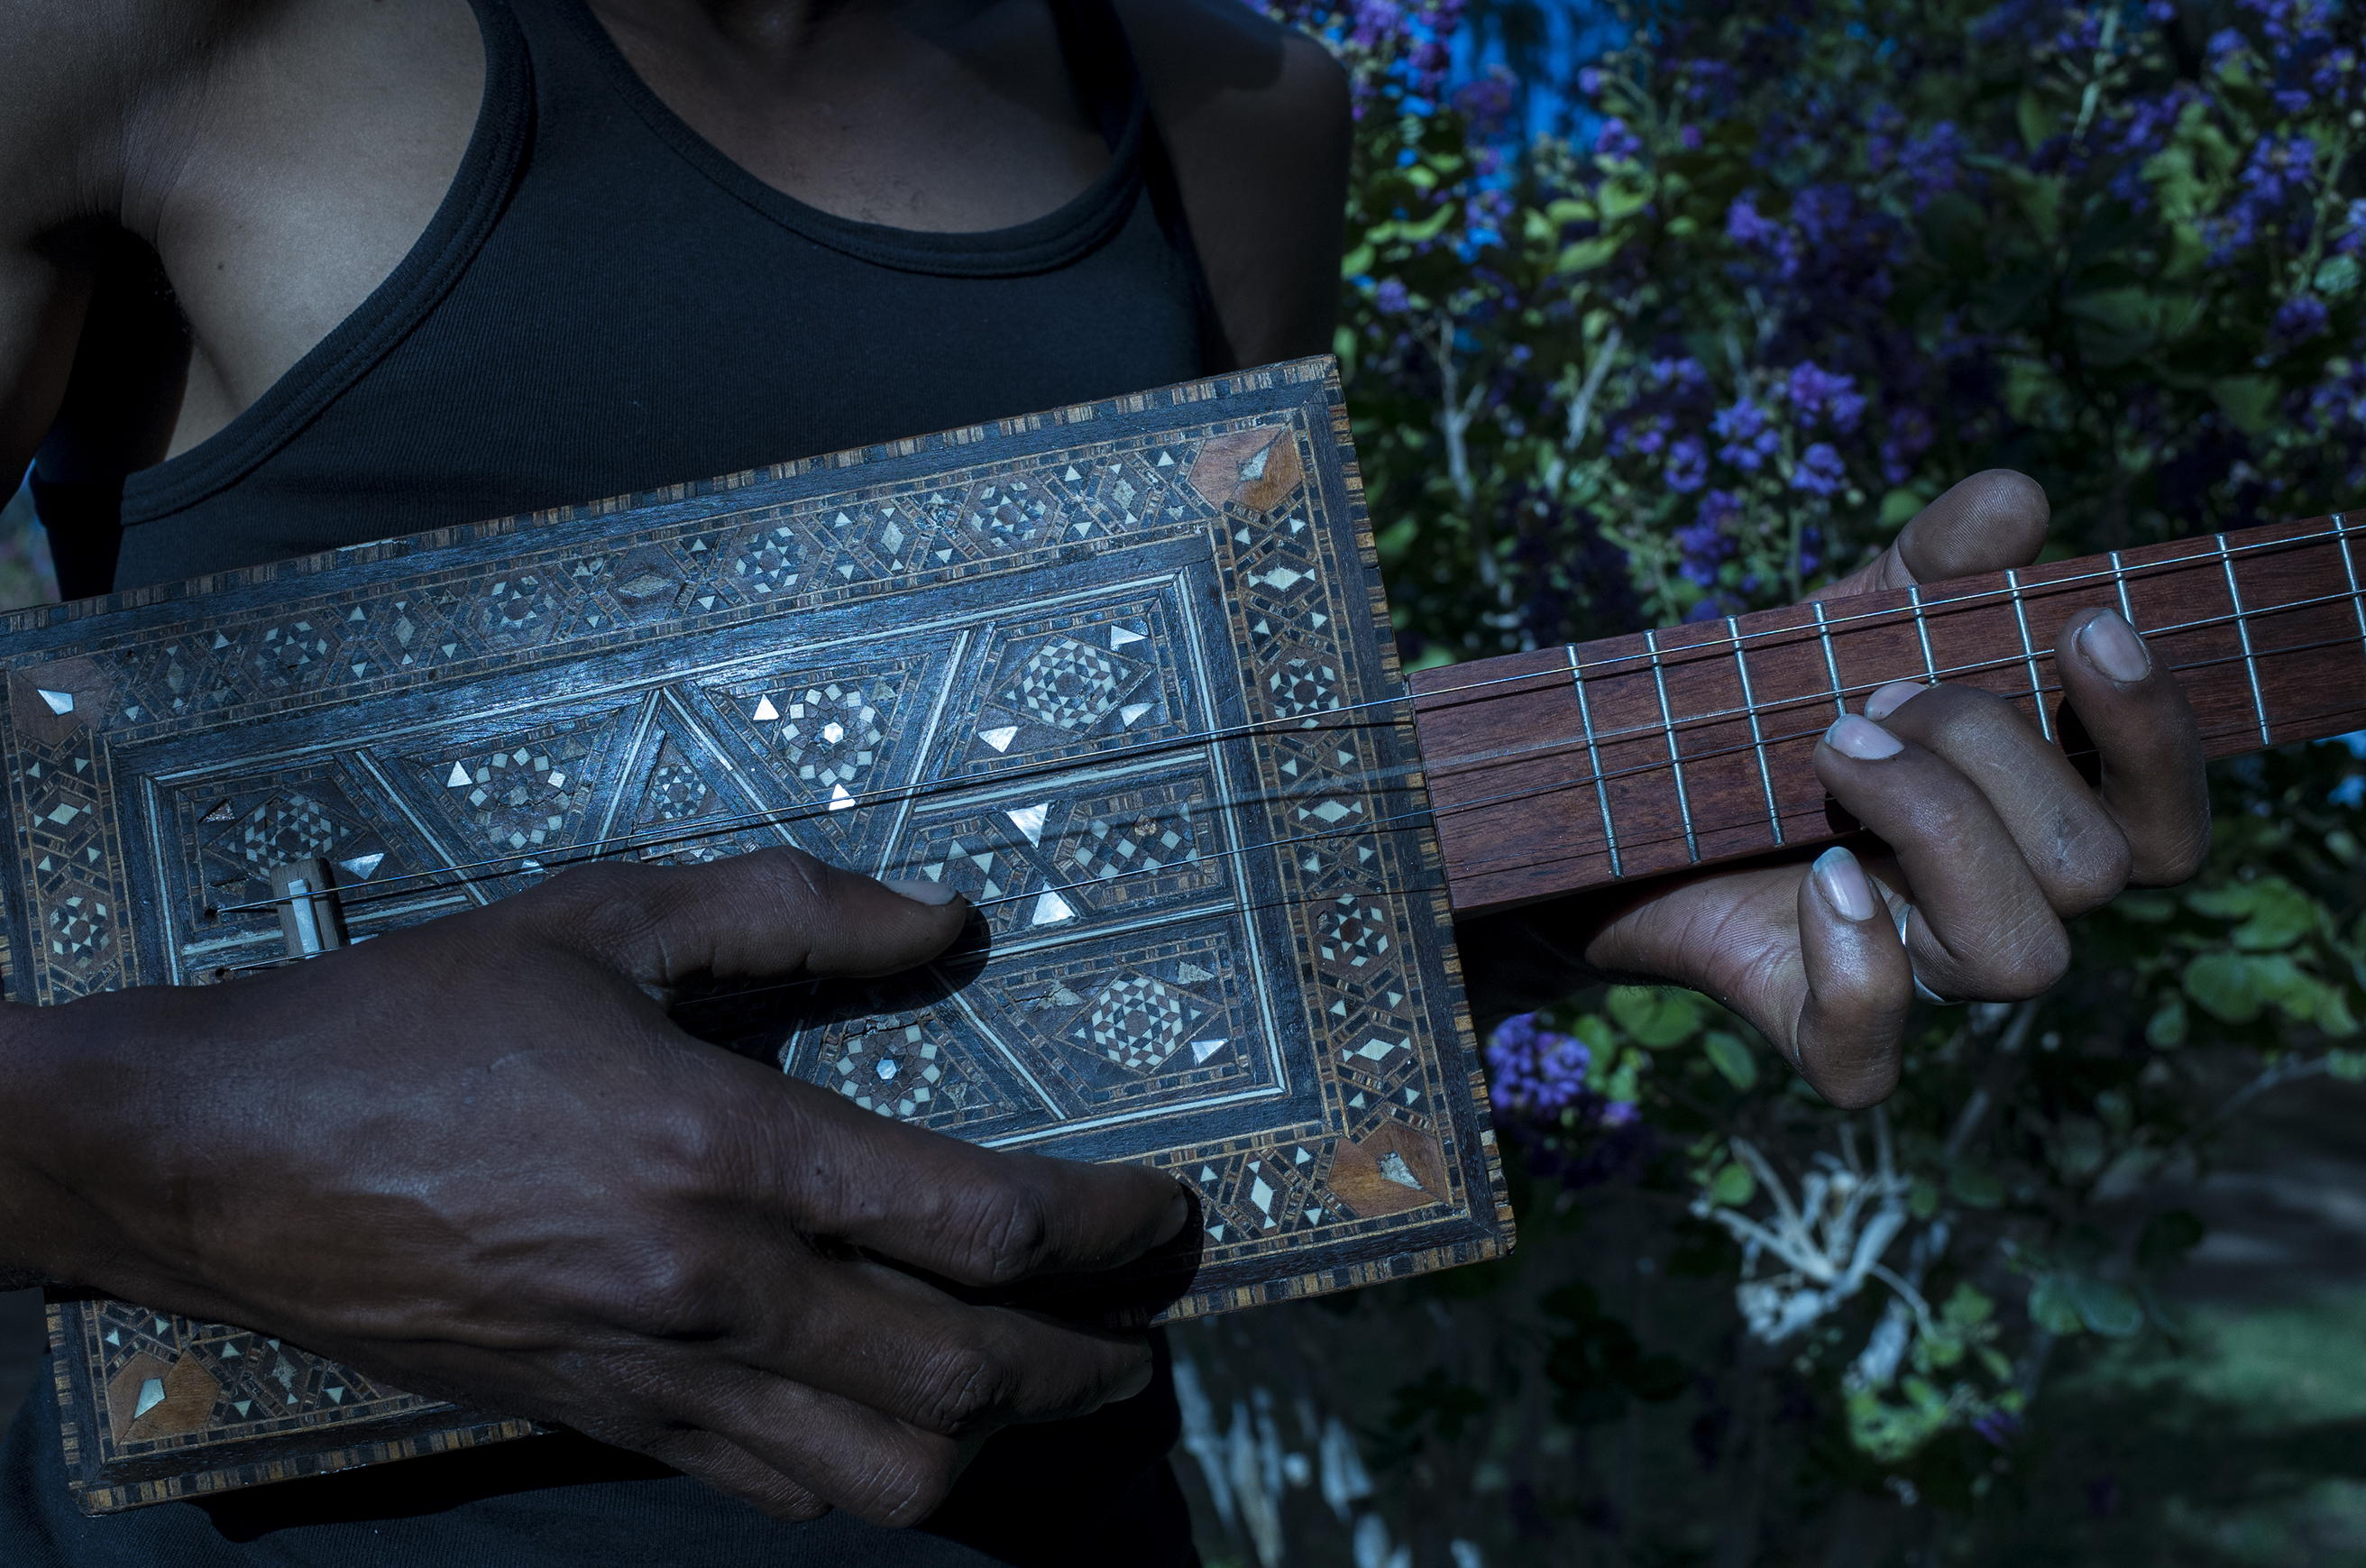 Untitled from series “Islam Played the Blues” by Toufic Beyhum